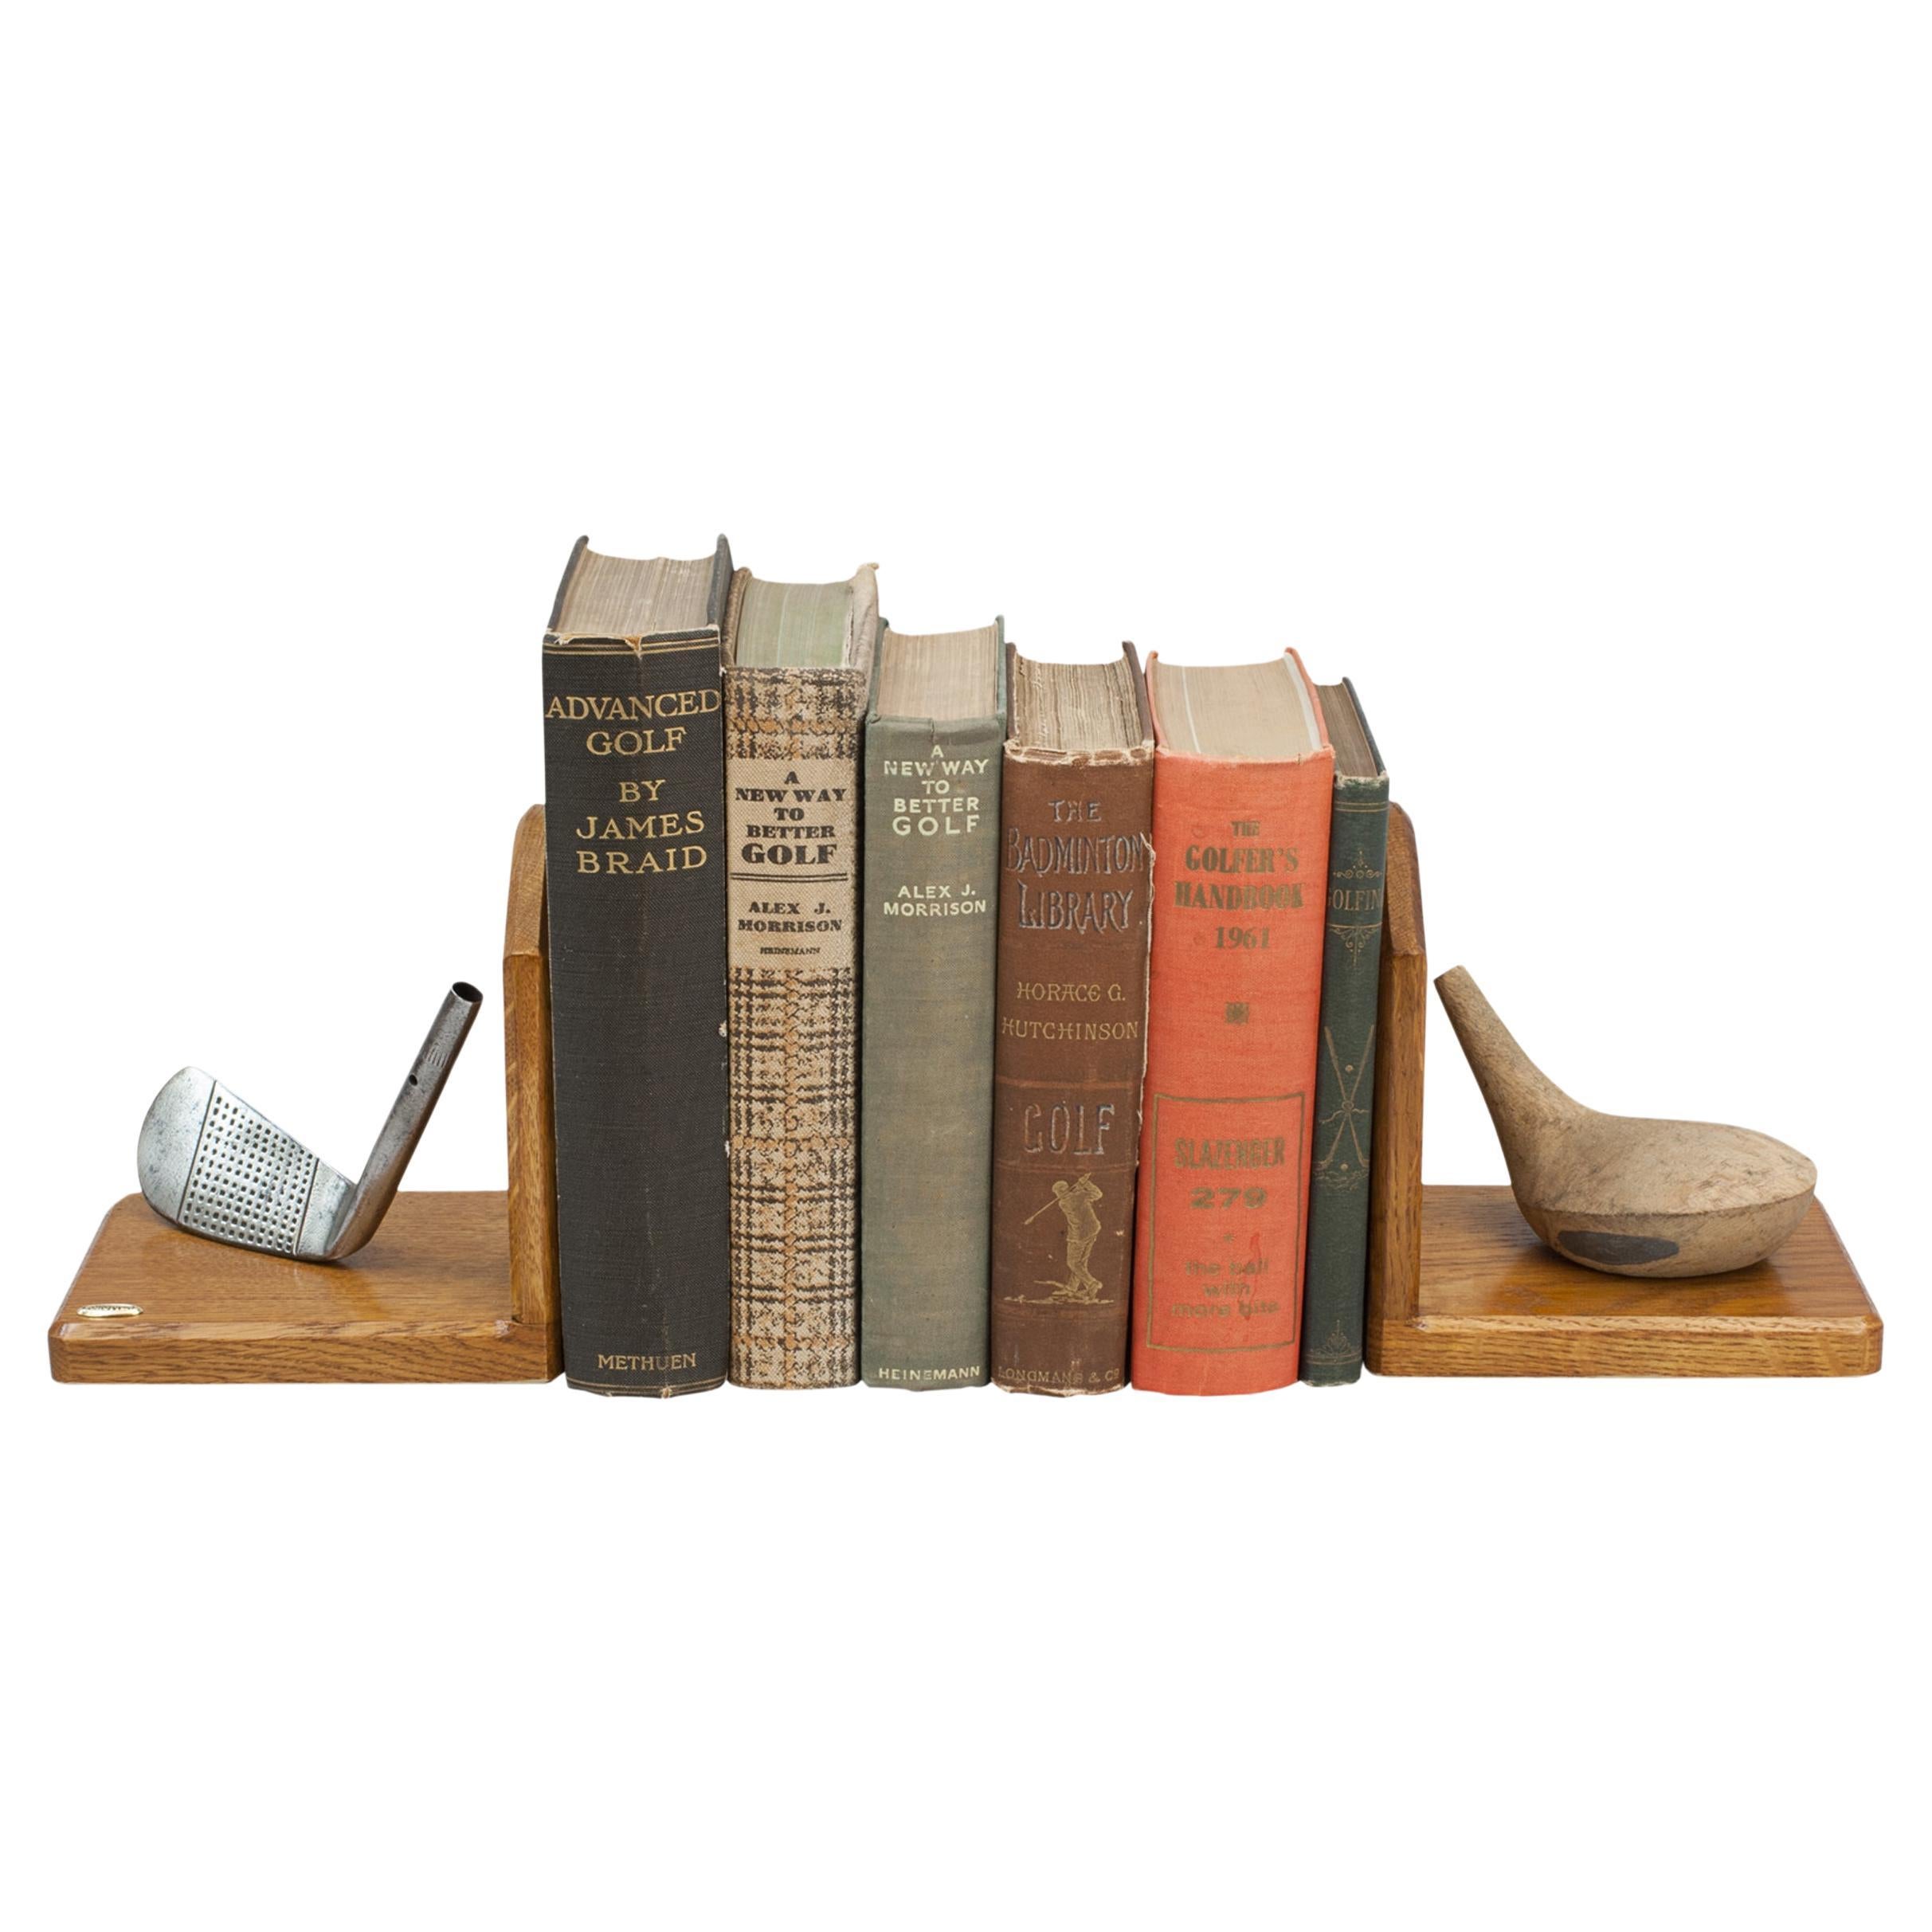 Robert Simpson Golf Club Bookends. For Sale